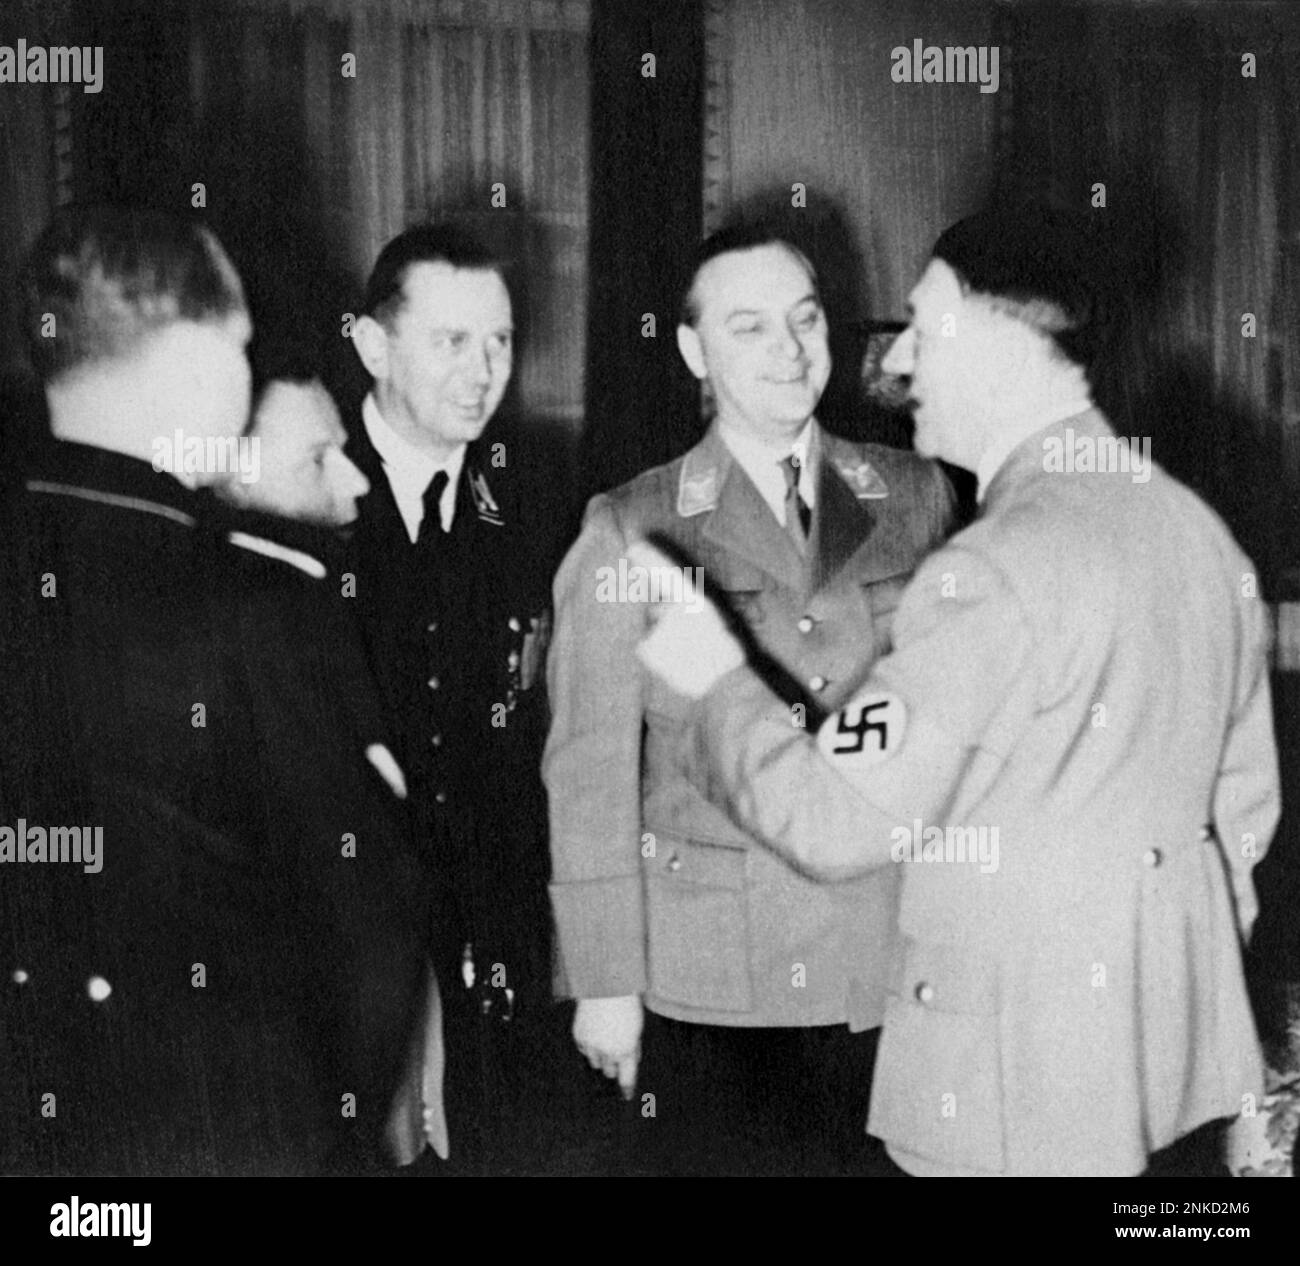 1938 , Berlin , GERMANY  : The german ALFRED ROSENBERG ( 1893 - 1946 ) , in center with gray uniform , at your party for his 45th birthday anniversary with ADOLF HITLER  .Was an early and intellectually influential member of the Nazi Party. He is considered one of the main authors of key Nazi ideological creeds, including its racial theory , persecution of the Jews , abrogation of the Treaty of Versailles  and opposition to ' degenerate ' modern Art . At Nuremberg he was tried, sentenced to death and executed by hanging as a war criminal - WWII - NAZI - NAZIST - SECONDA GUERRA MONDIALE - NAZIS Stock Photo